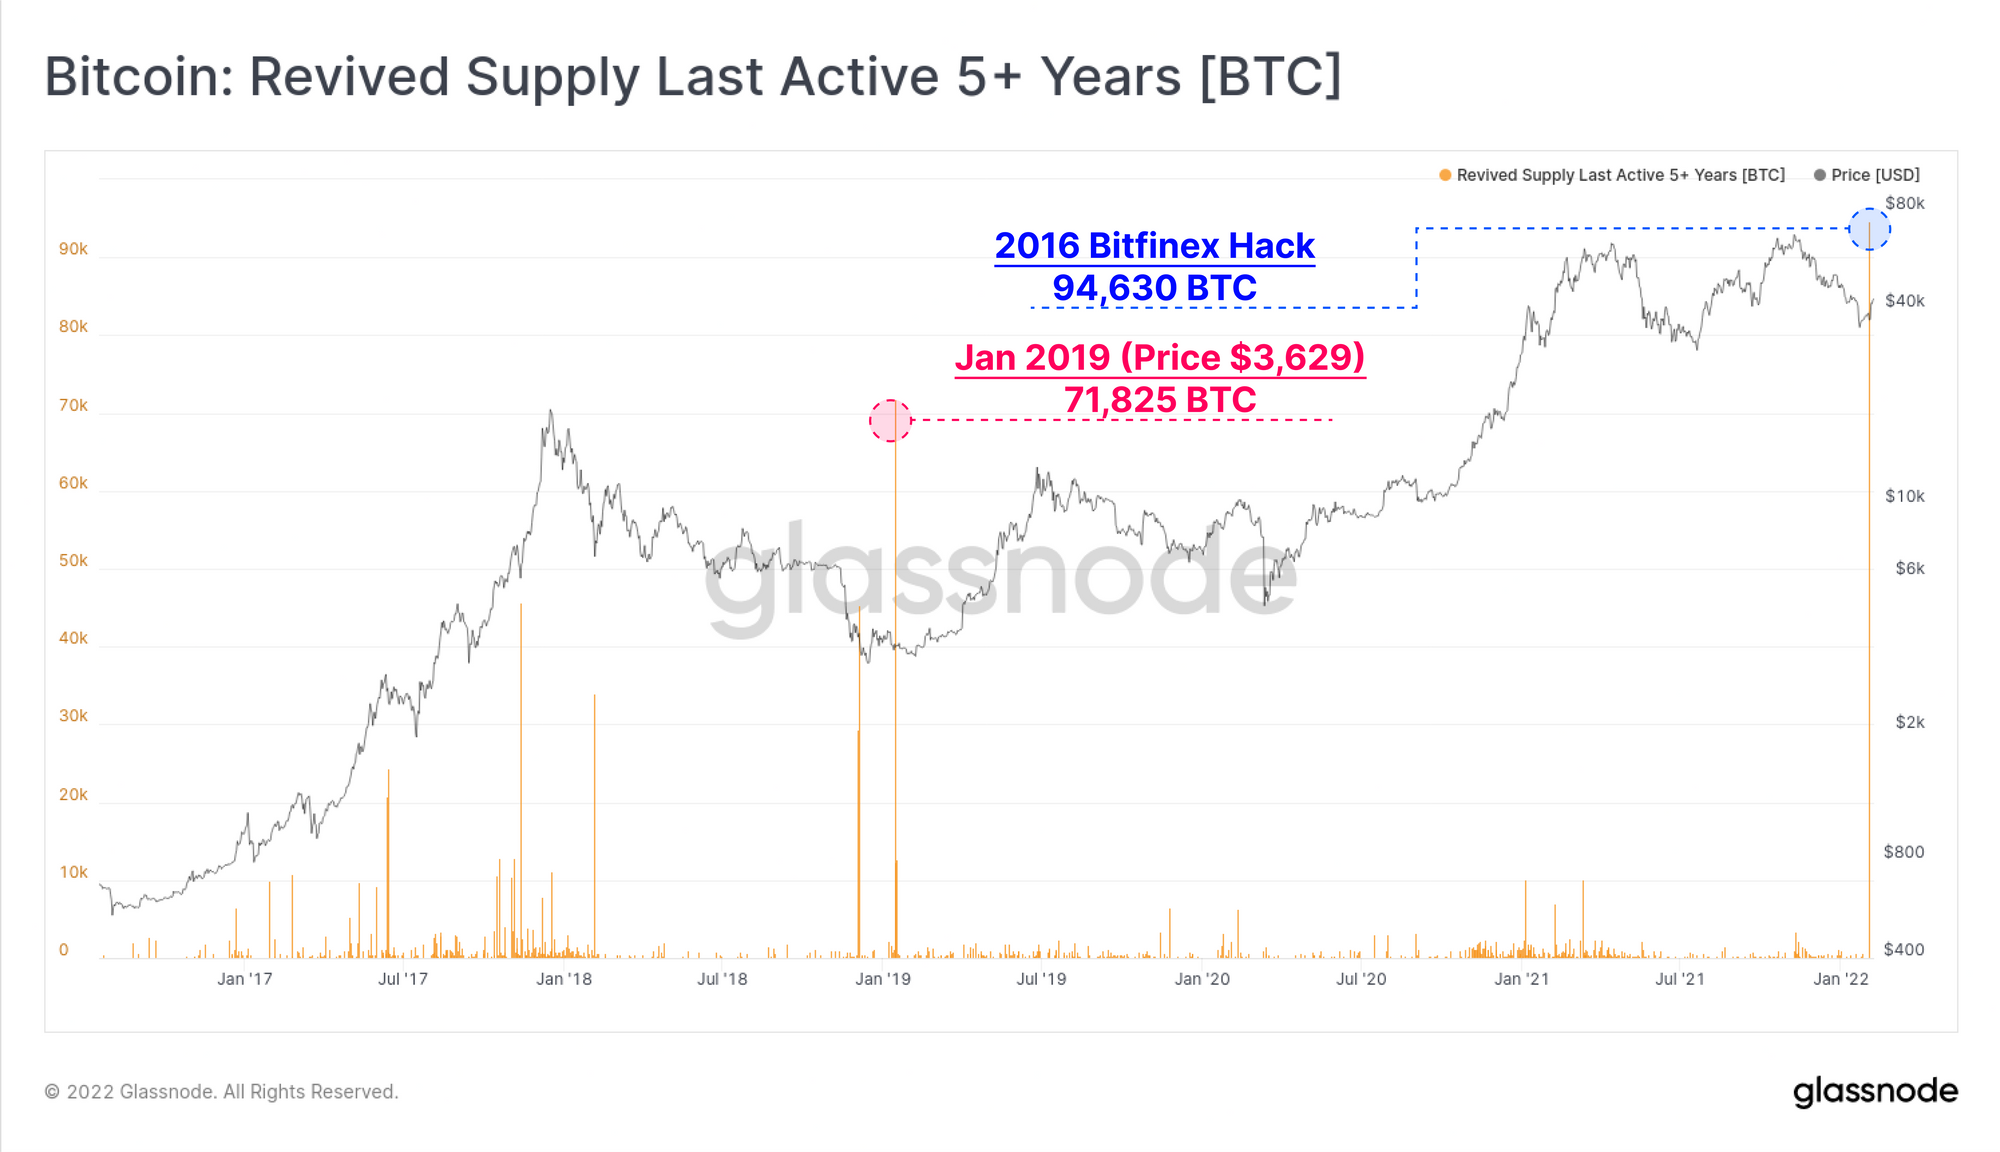 Bitcoin Revived Supply 5+ Years